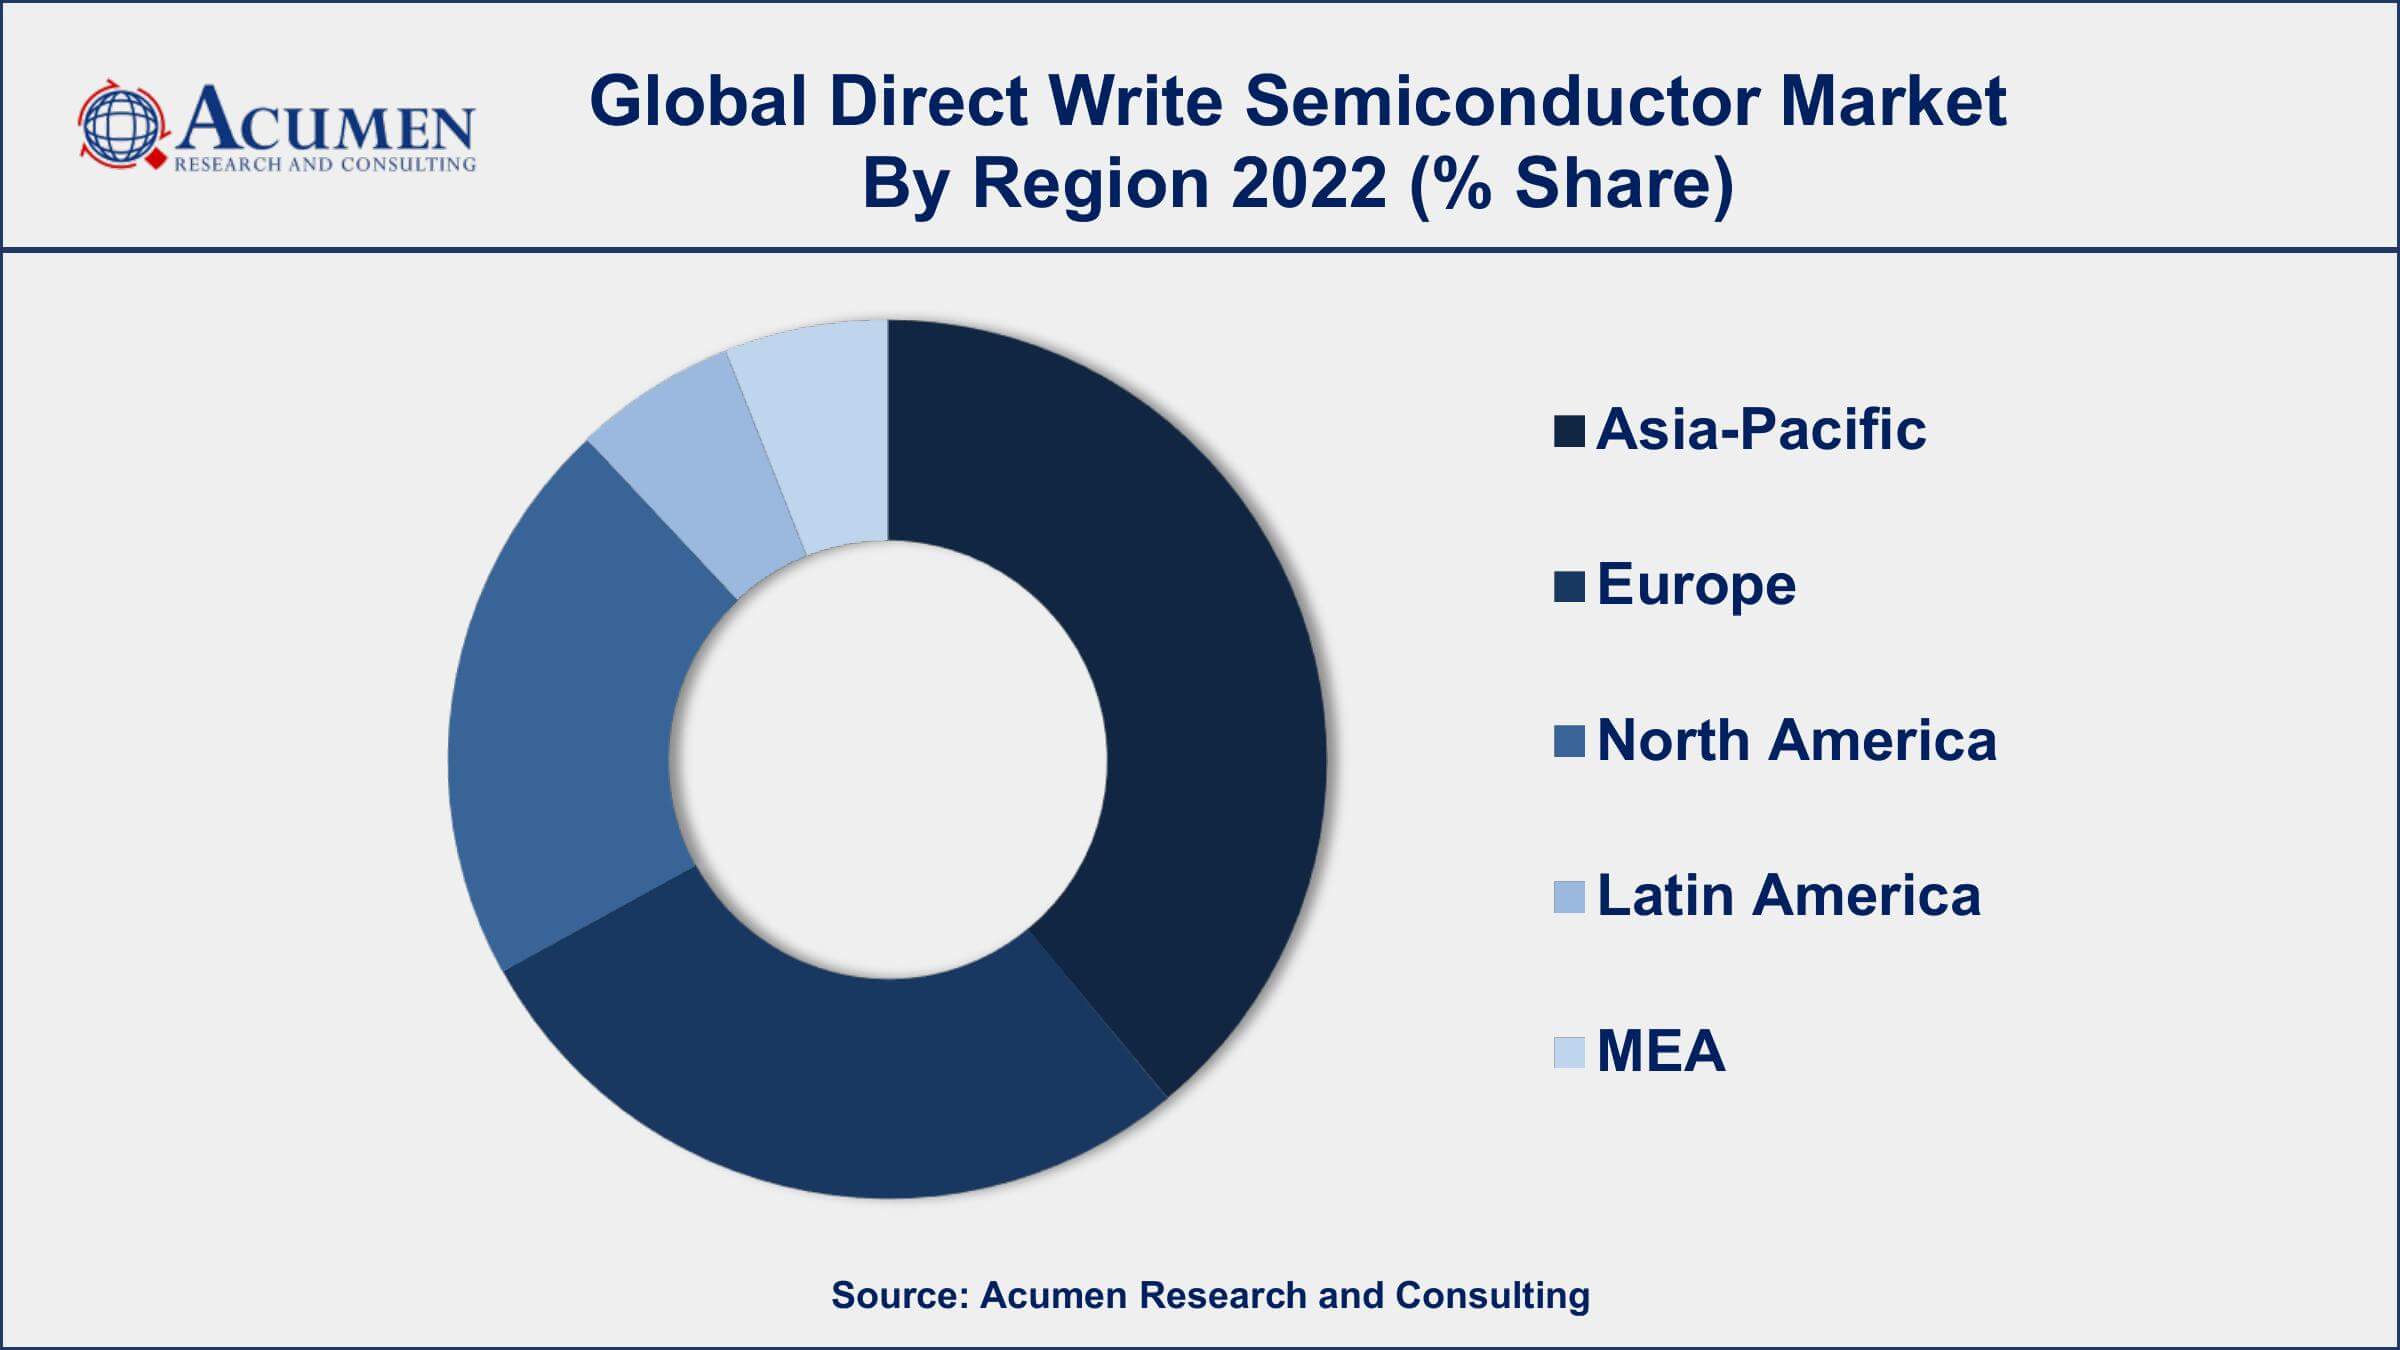 Direct Write Semiconductor Market Drivers